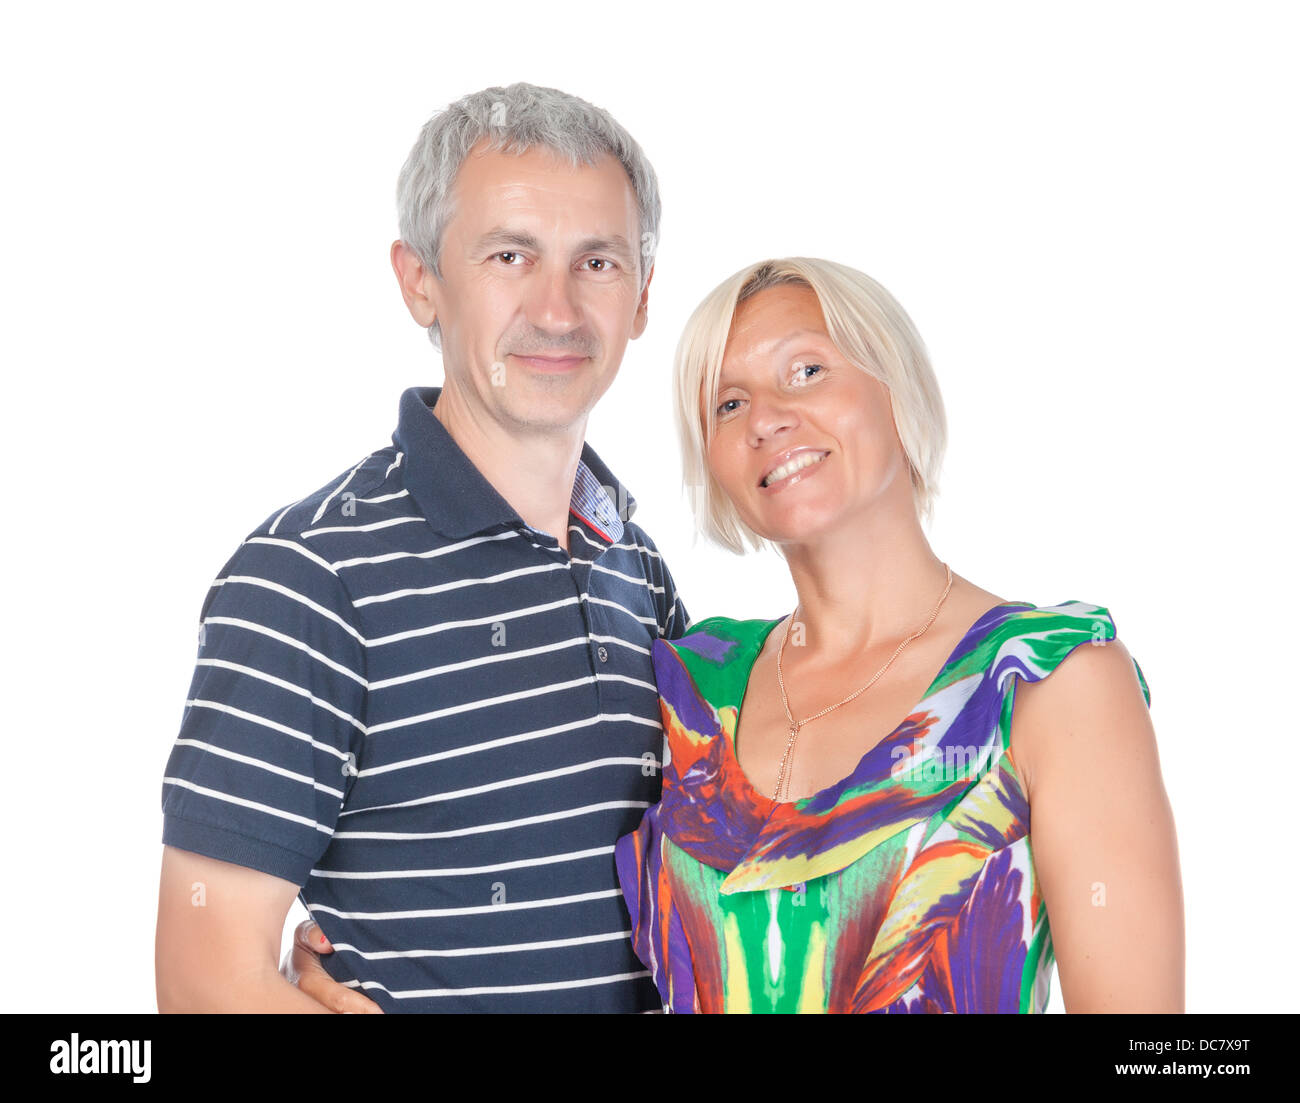 Smiling attractive middle-aged couple standing close together looking at the camera isolated on white Stock Photo